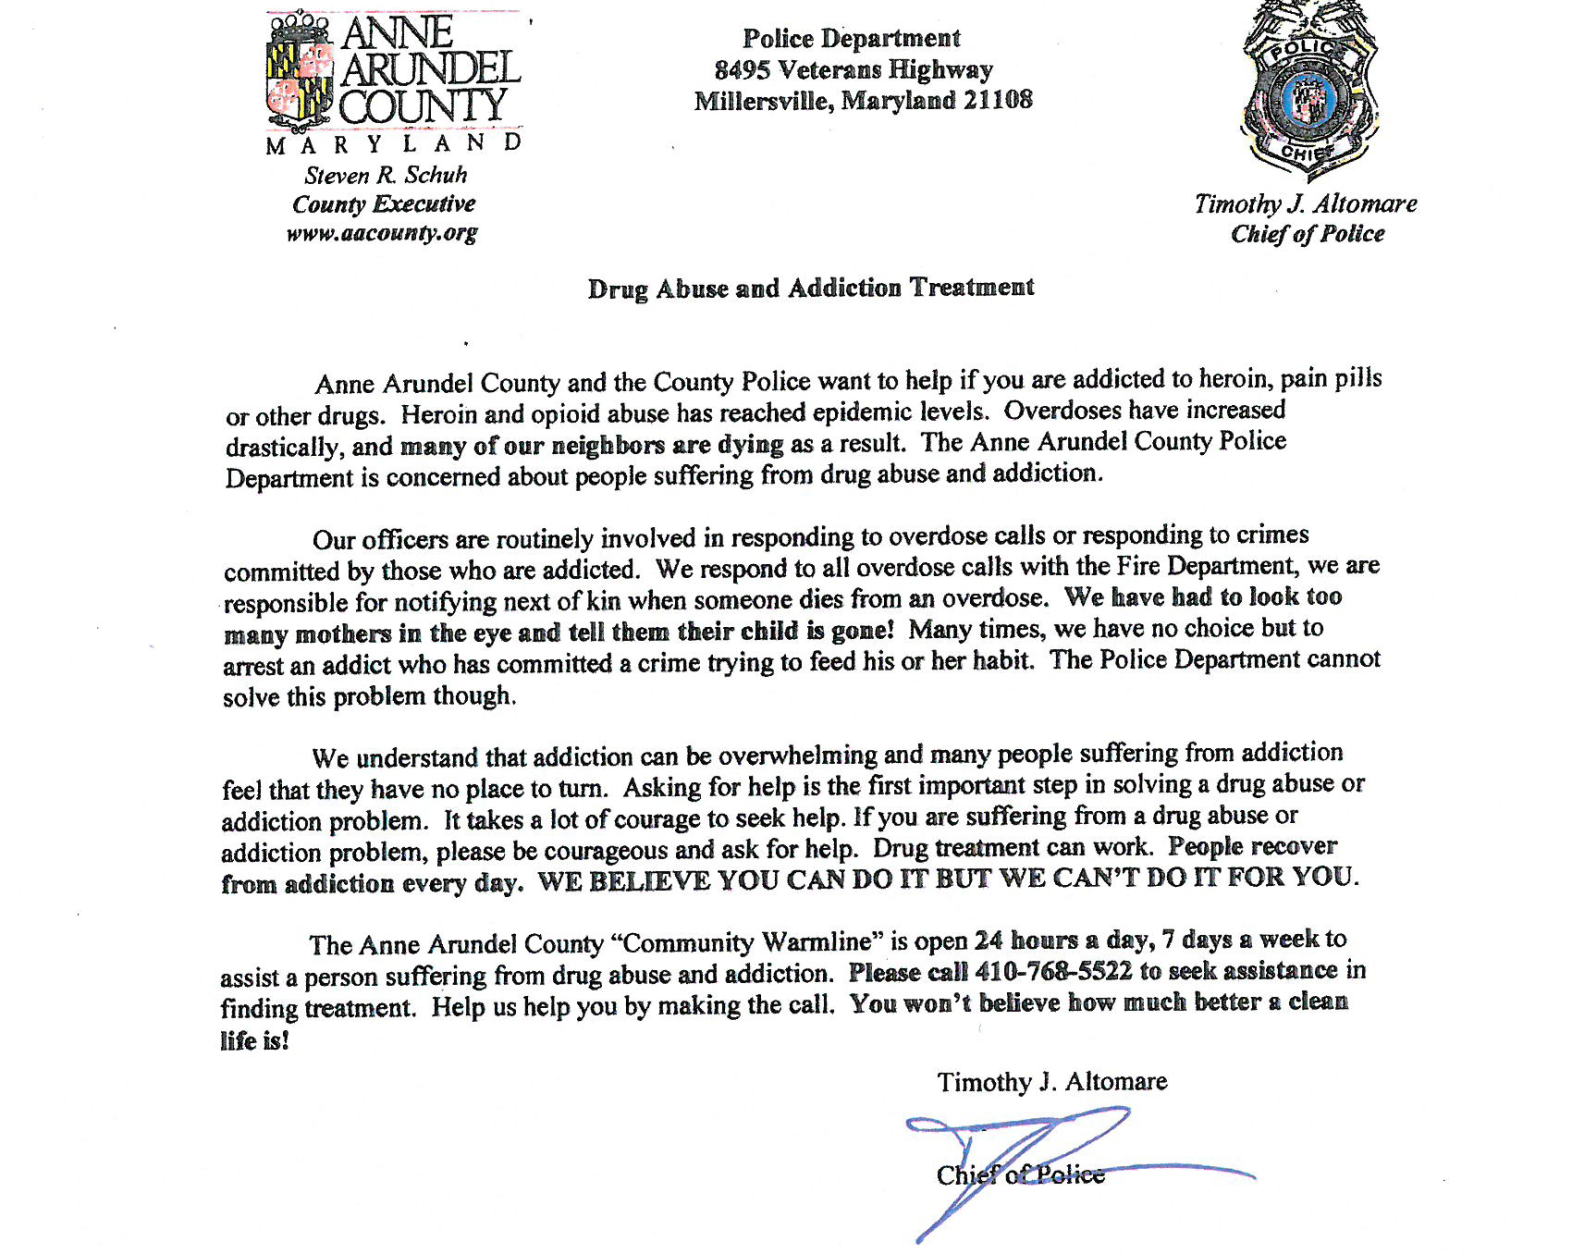 Every suspected heroin addict that is arrested in Anne Arundel County, Maryland, receives a letter from Police Chief Tim Altomare, pleading with them to let the department help them on the road to recovery. (Courtesy Anne Arundel County police)